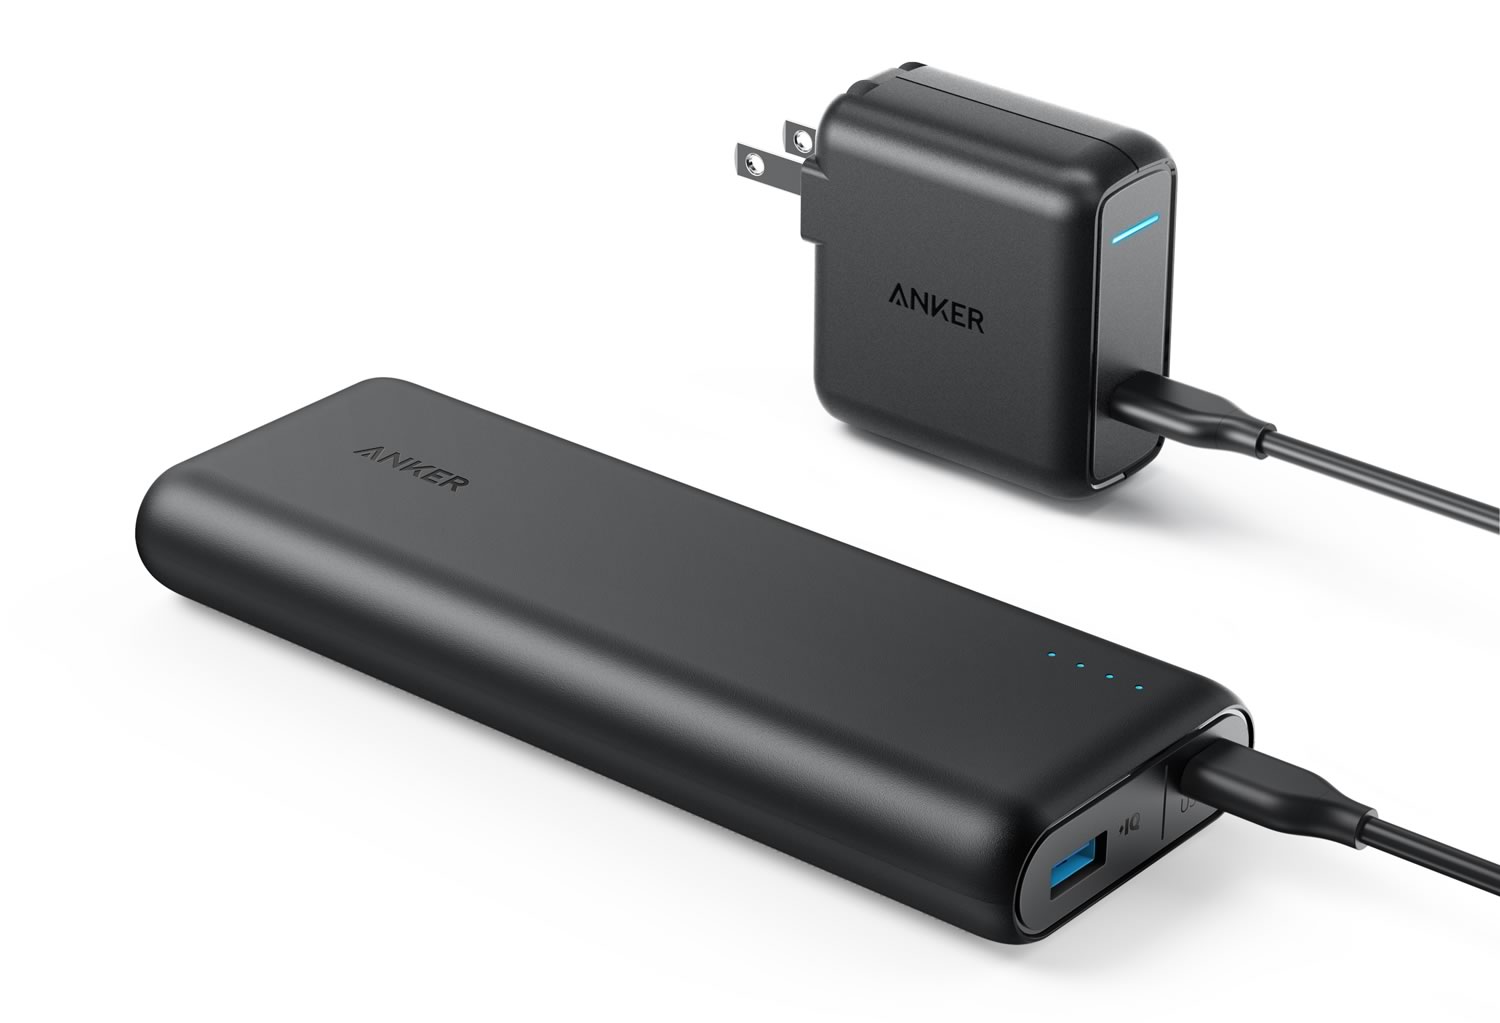 Anker、Power Delivery対応の超大容量モバイルバッテリー｢Anker PowerCore Speed 20000 PD｣を発売 − 先着100個限定で500円オフに